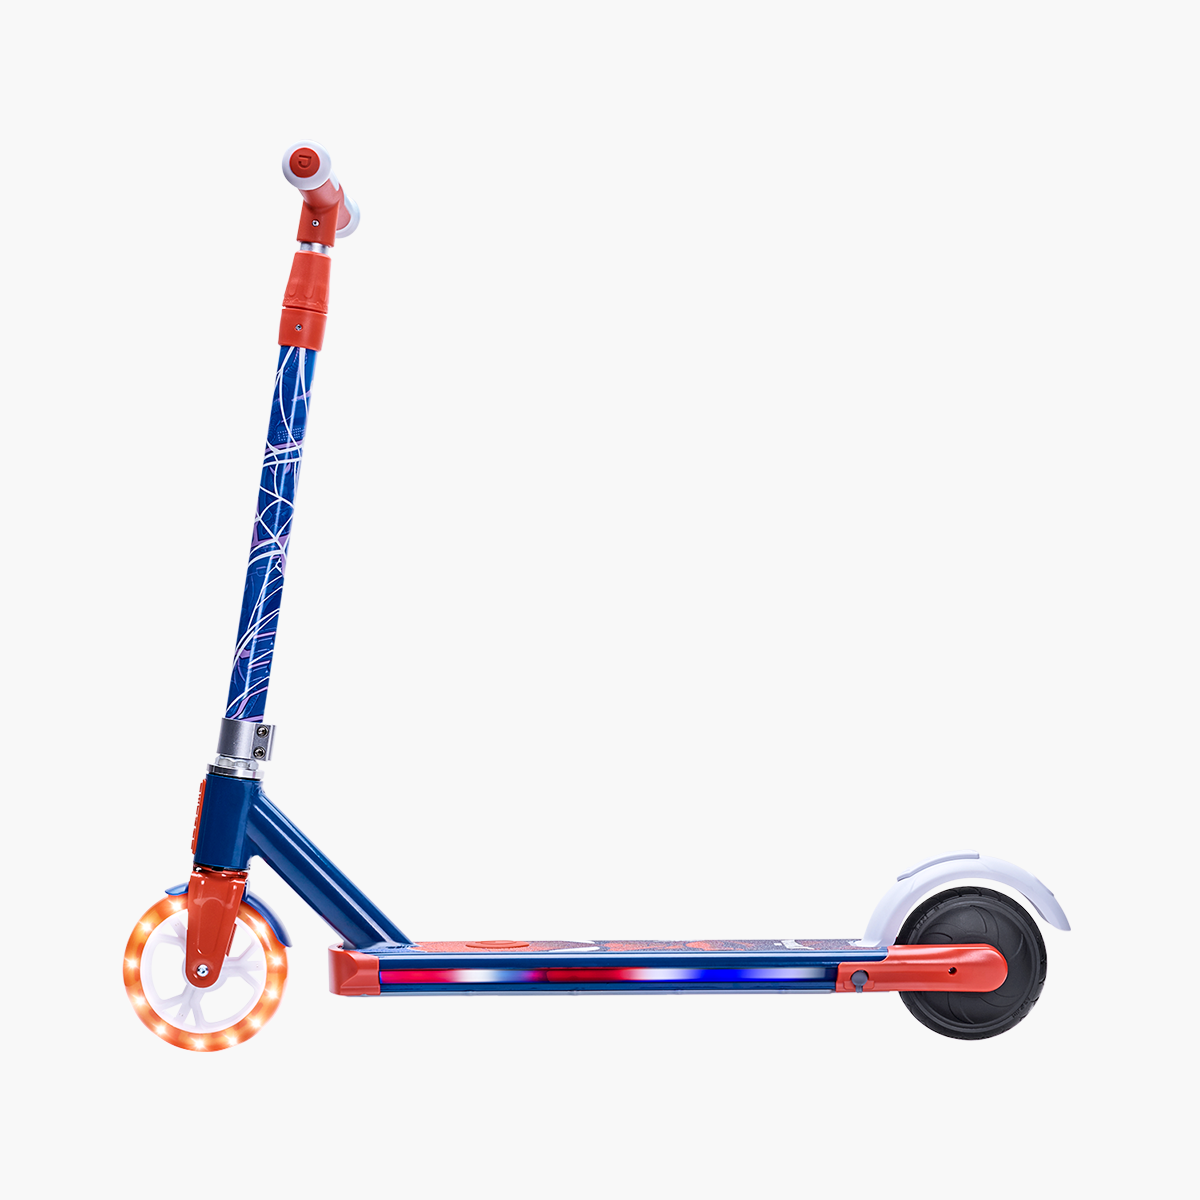 side view of the Spiderman electric scooter facing the left